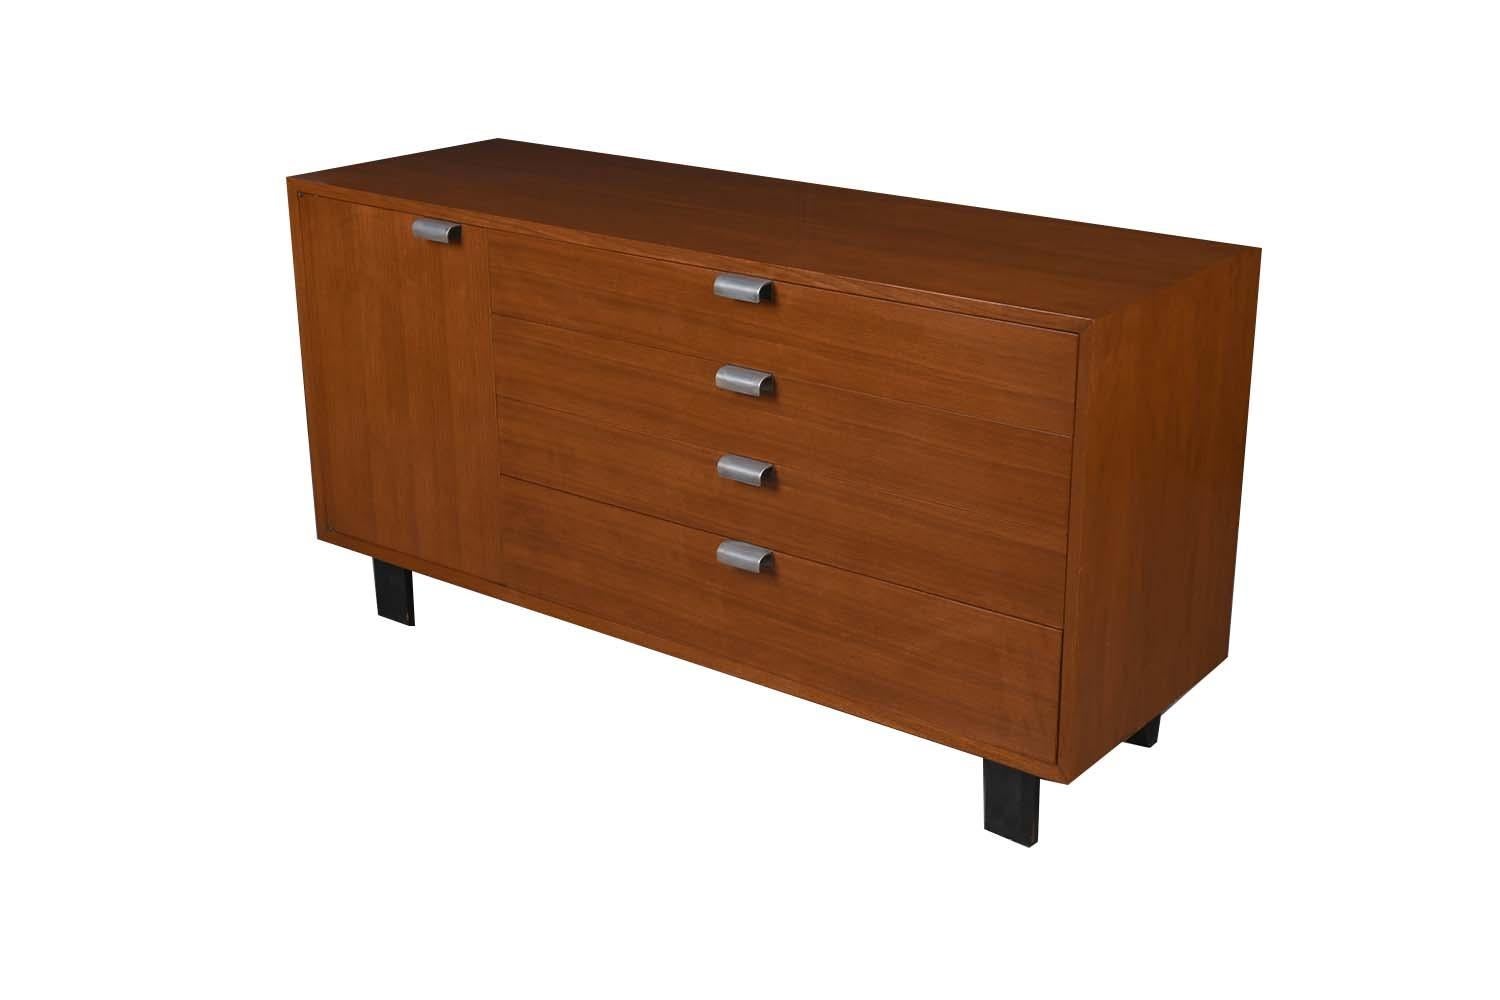 Iconic and classic Mid-Century Modern dresser designed by George Nelson for the Herman Miller Primavera line, circa 1950s. Iconic piece resulting from the collaboration of these two MCM Masters! Often referred to as the Primavera Line, part of the